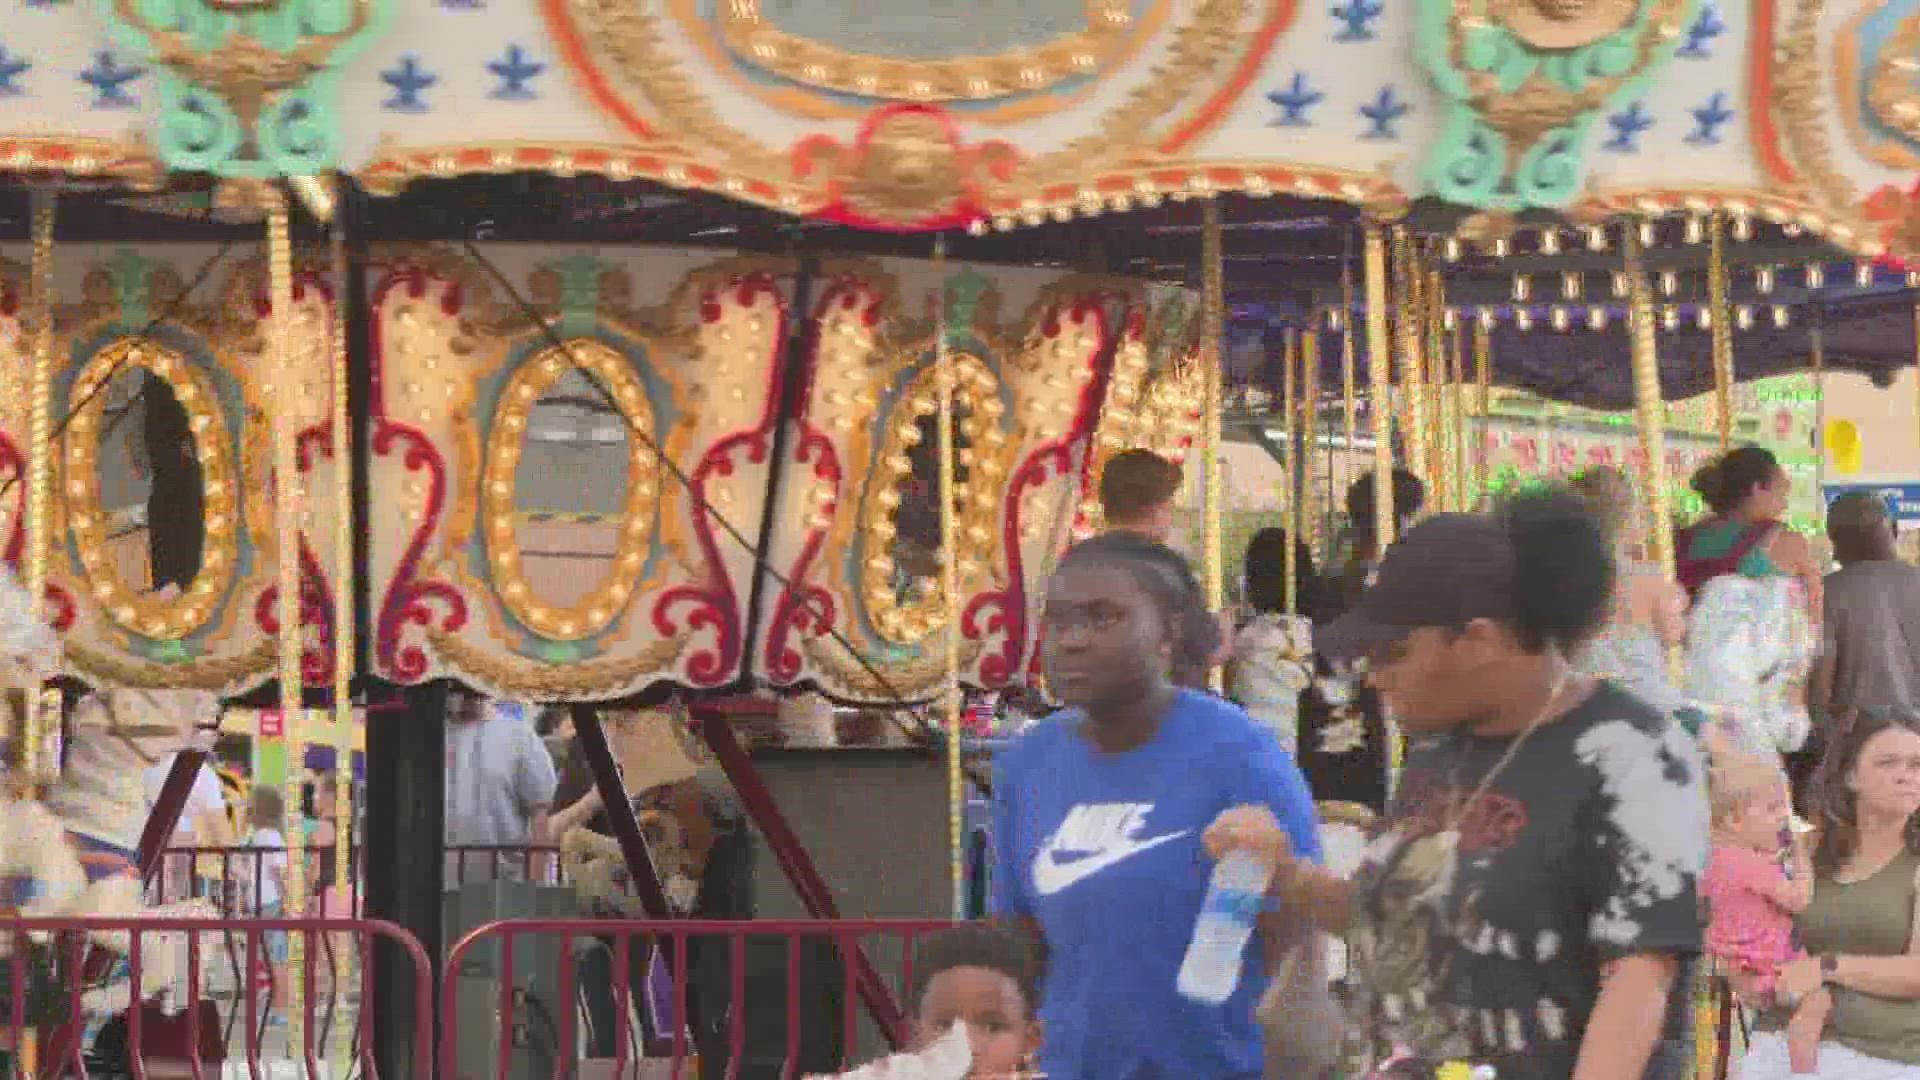 Security measures have been put in place and the Kentucky State Fair is expecting its largest turnout during the final weekend.